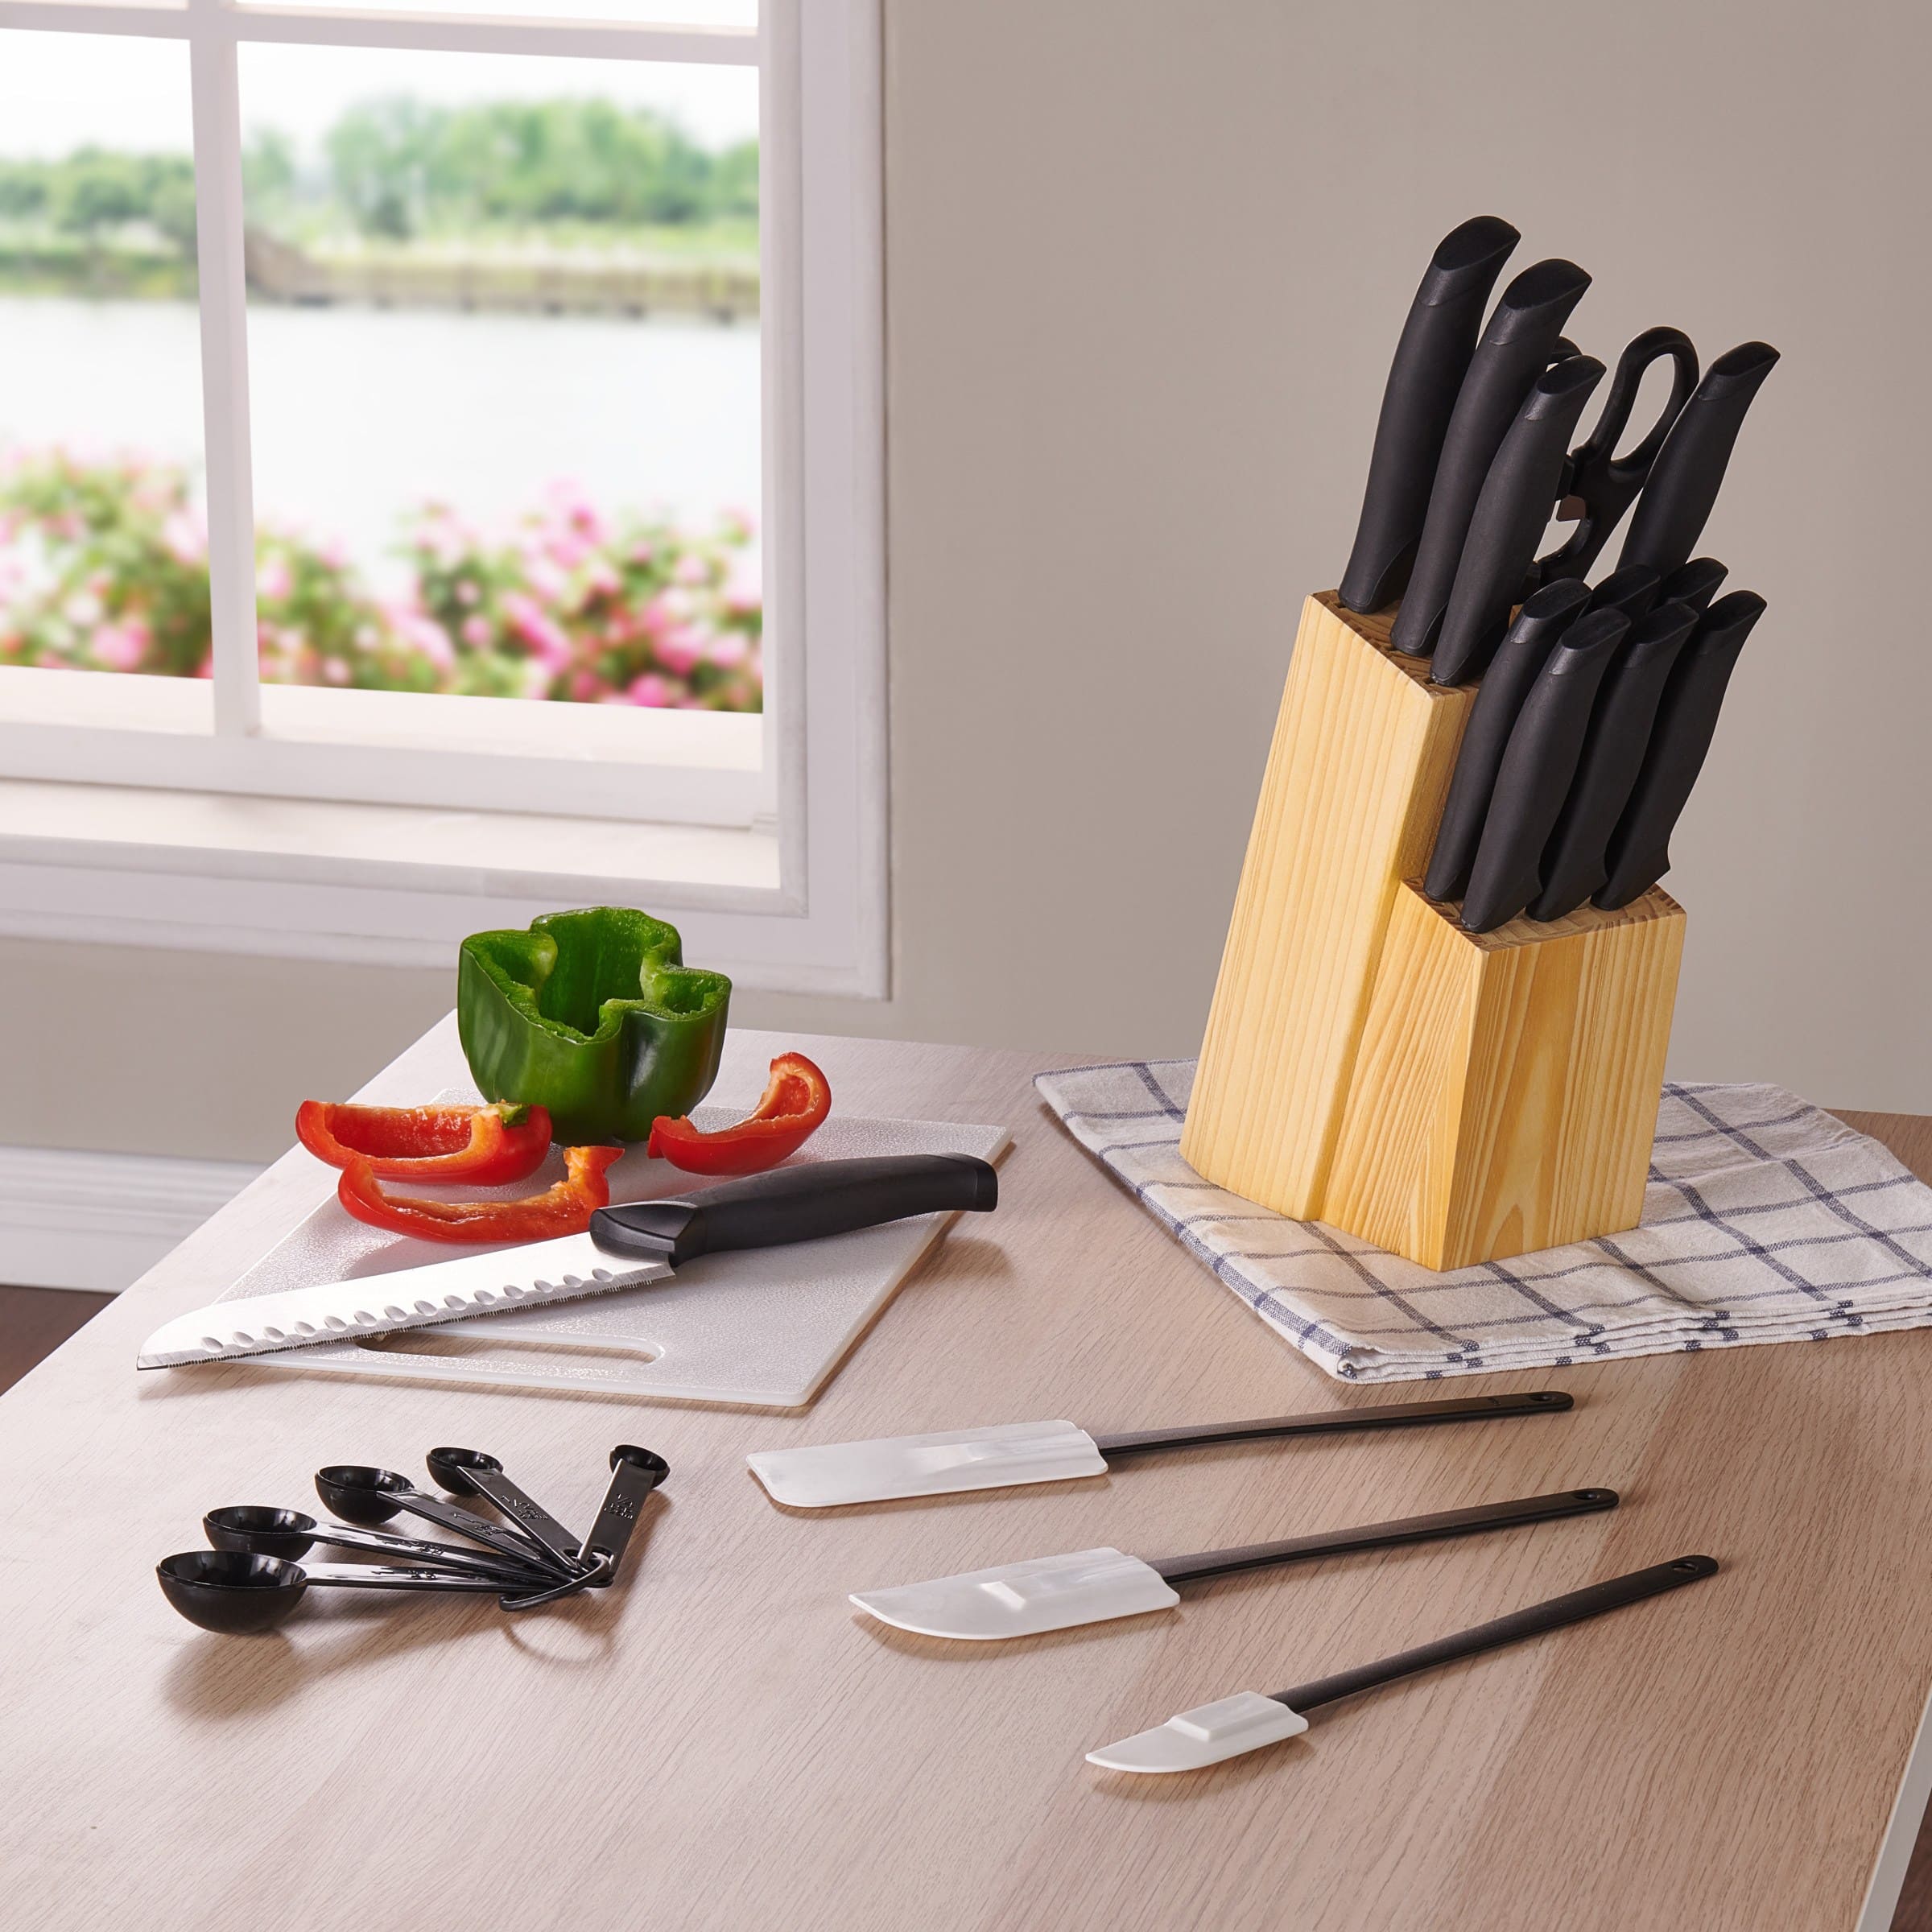 Mainstays 23 Piece Knife and Kitchen Tool Set with Wood Storage Block